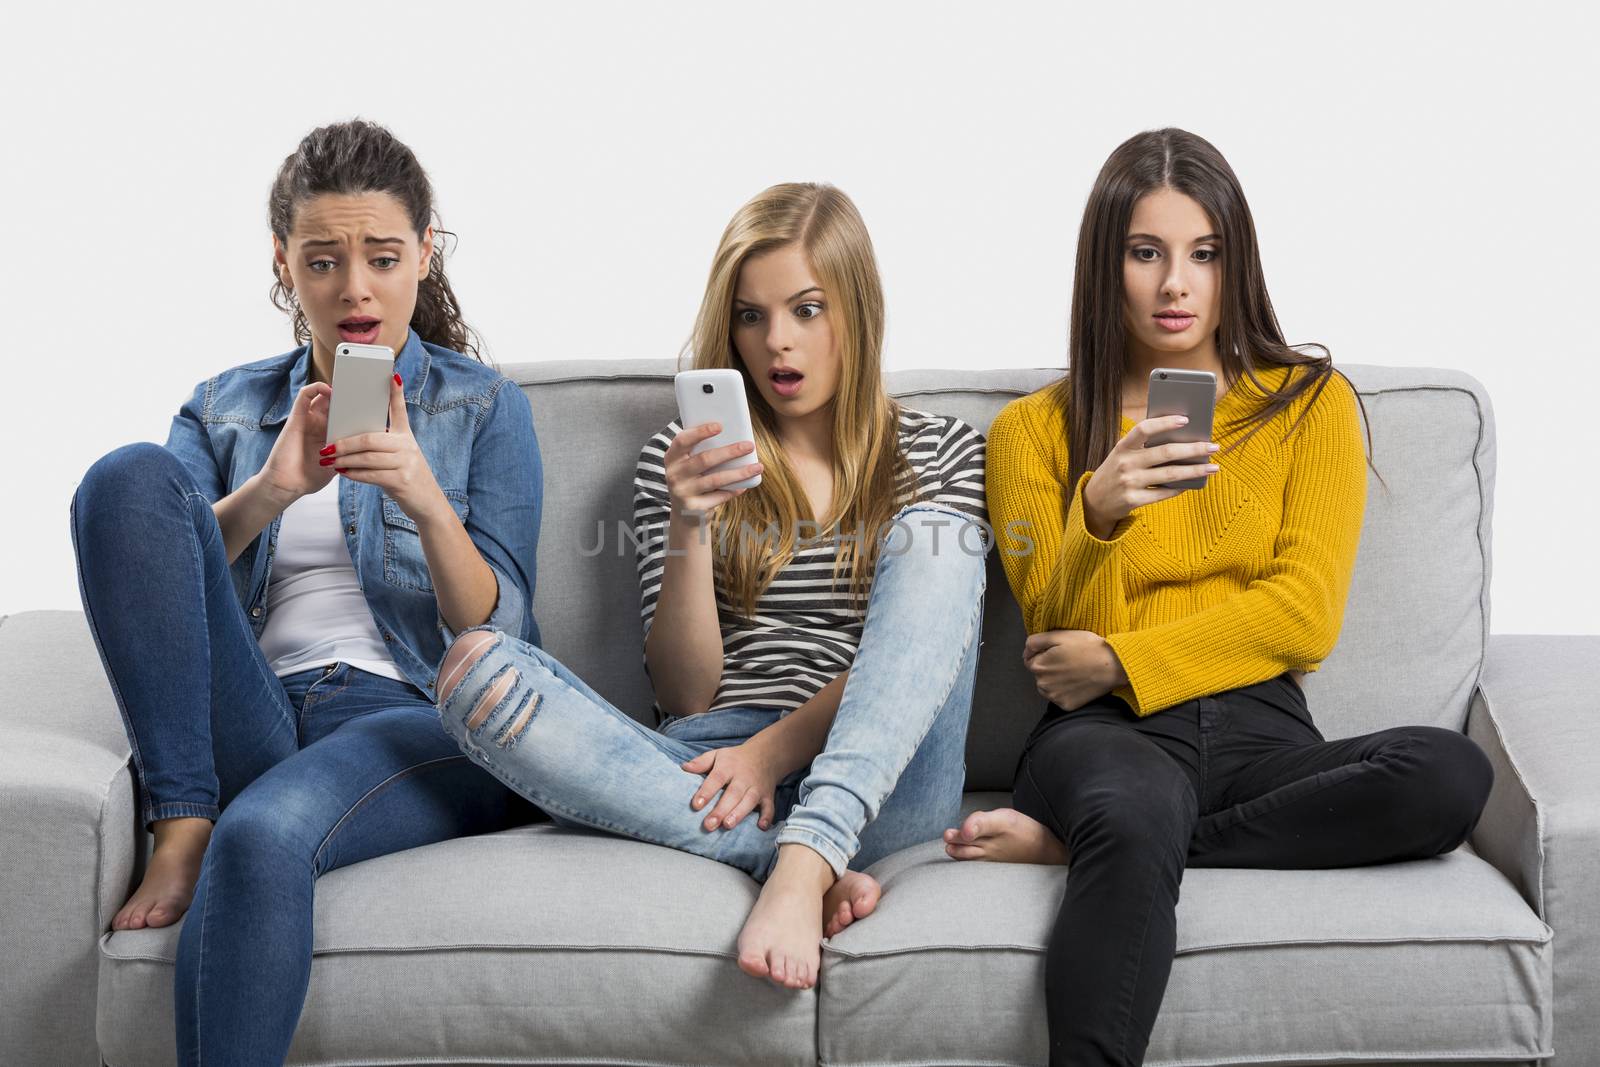 Happy teen girls at home using cellphone